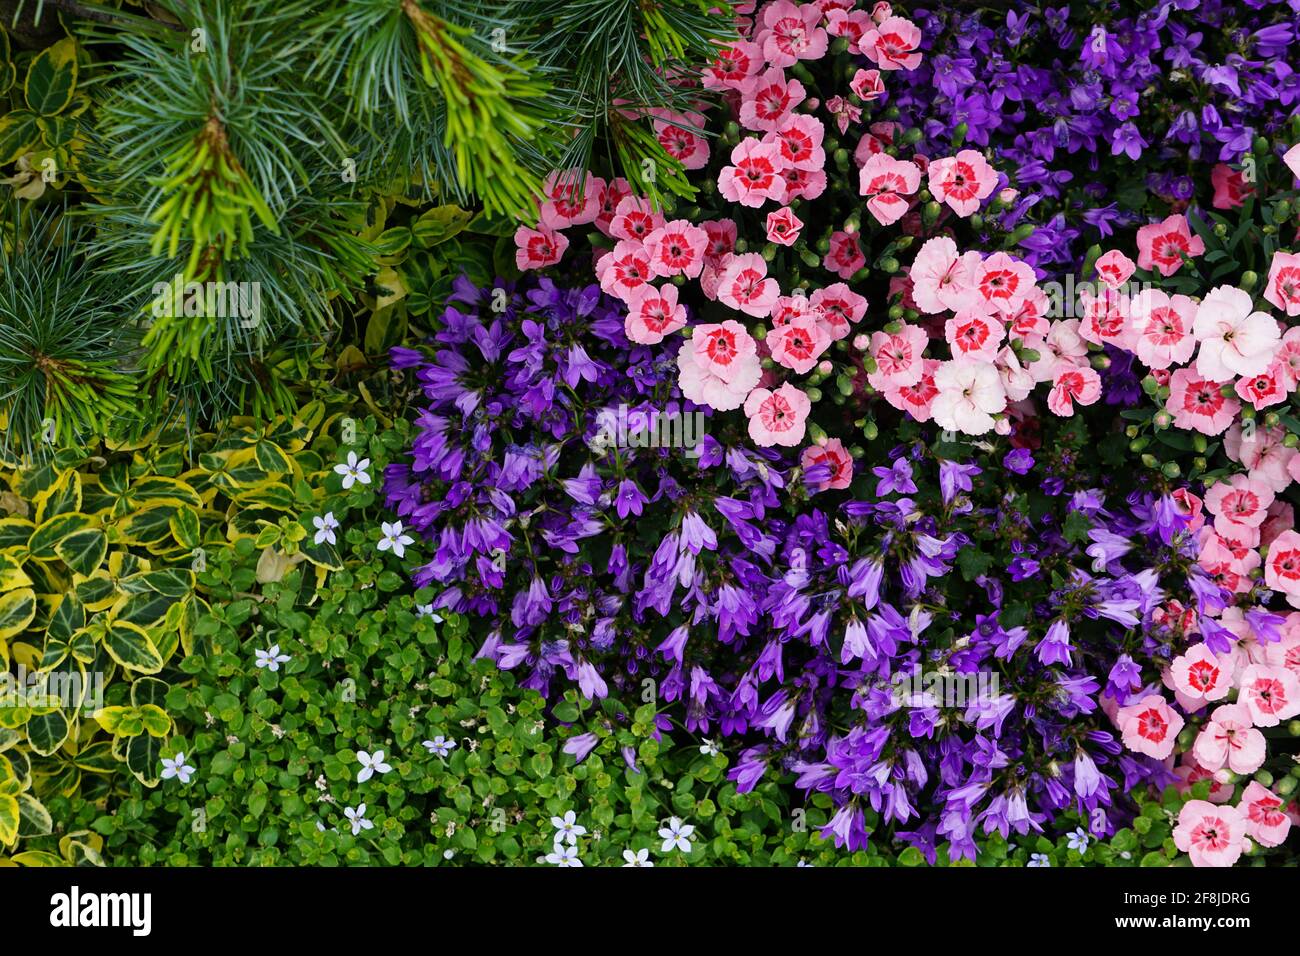 Top view of colorful garden flowers and plants Stock Photo